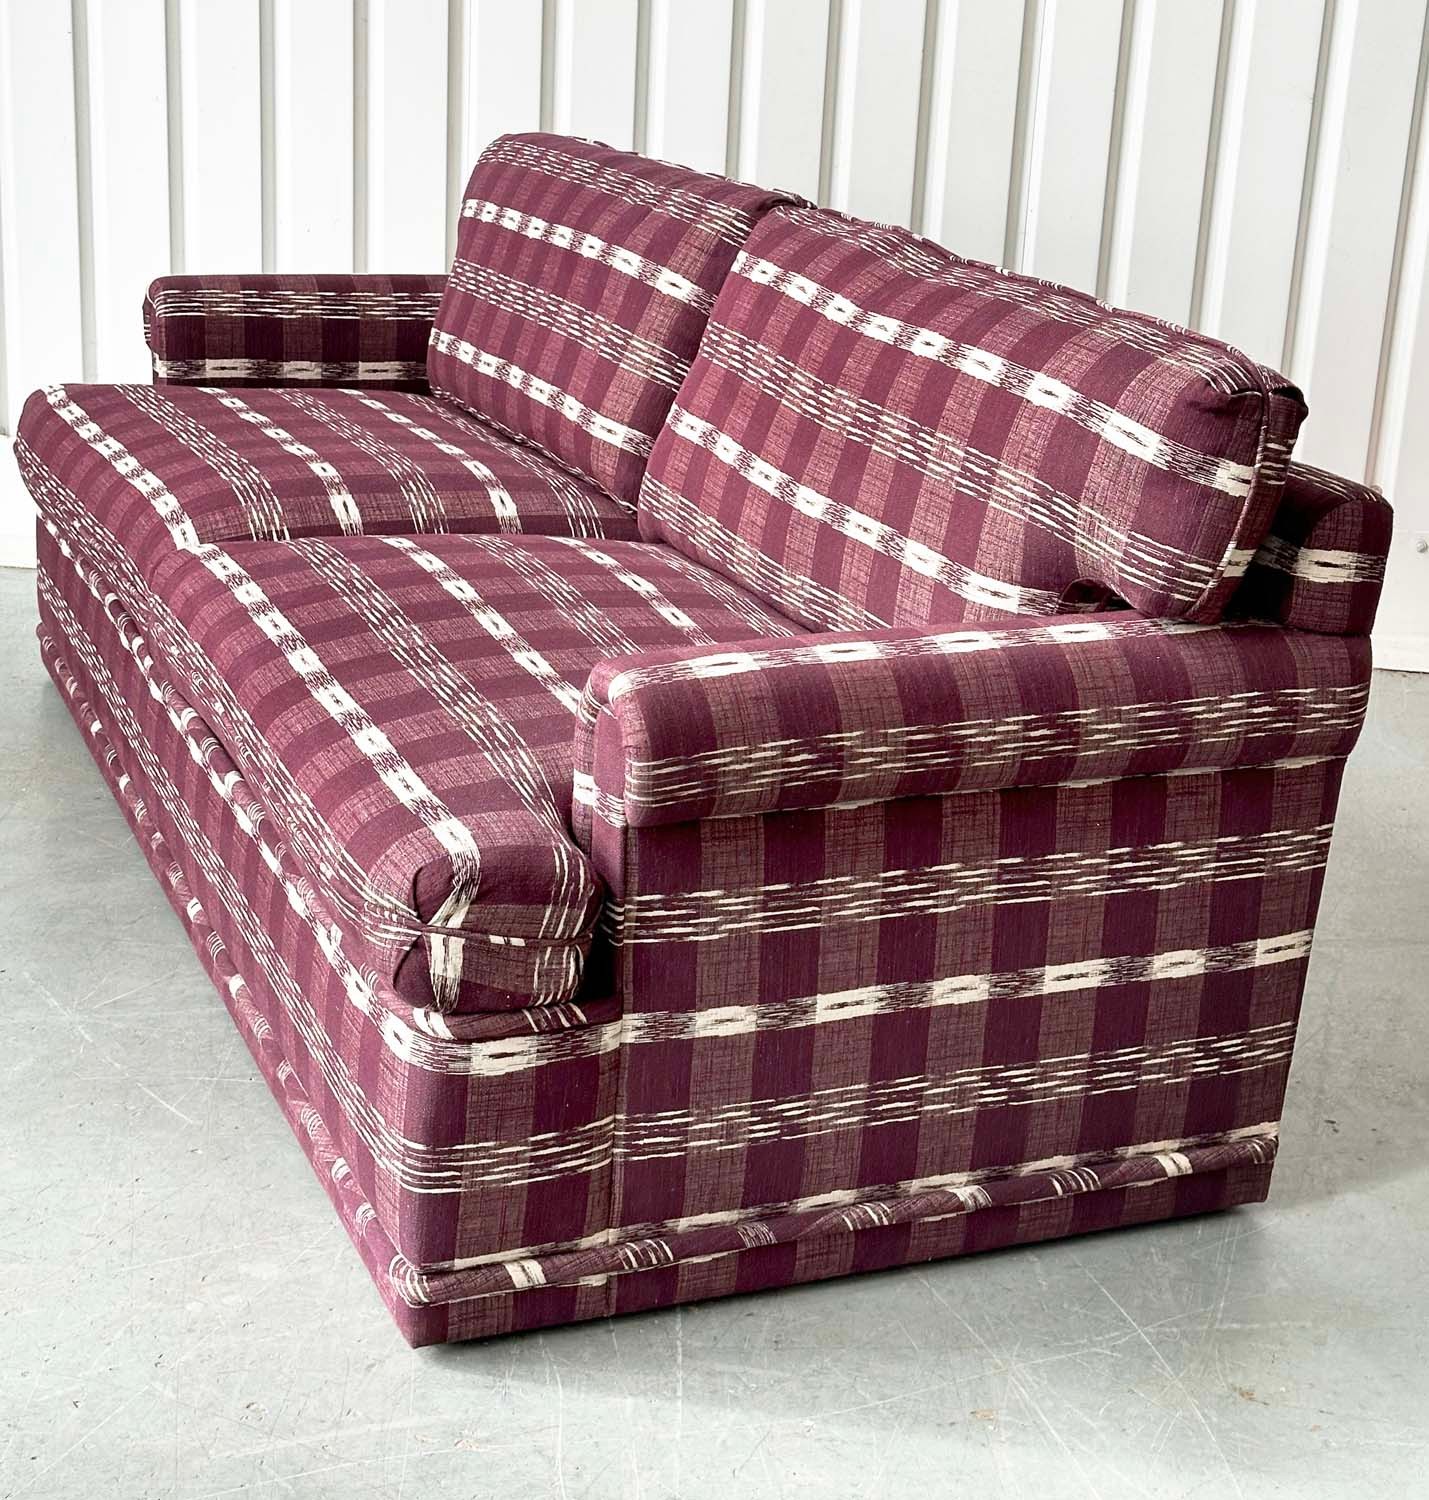 SOFA, Swedish check purple/white upholstery with scroll arms, 203cm W. - Image 8 of 9